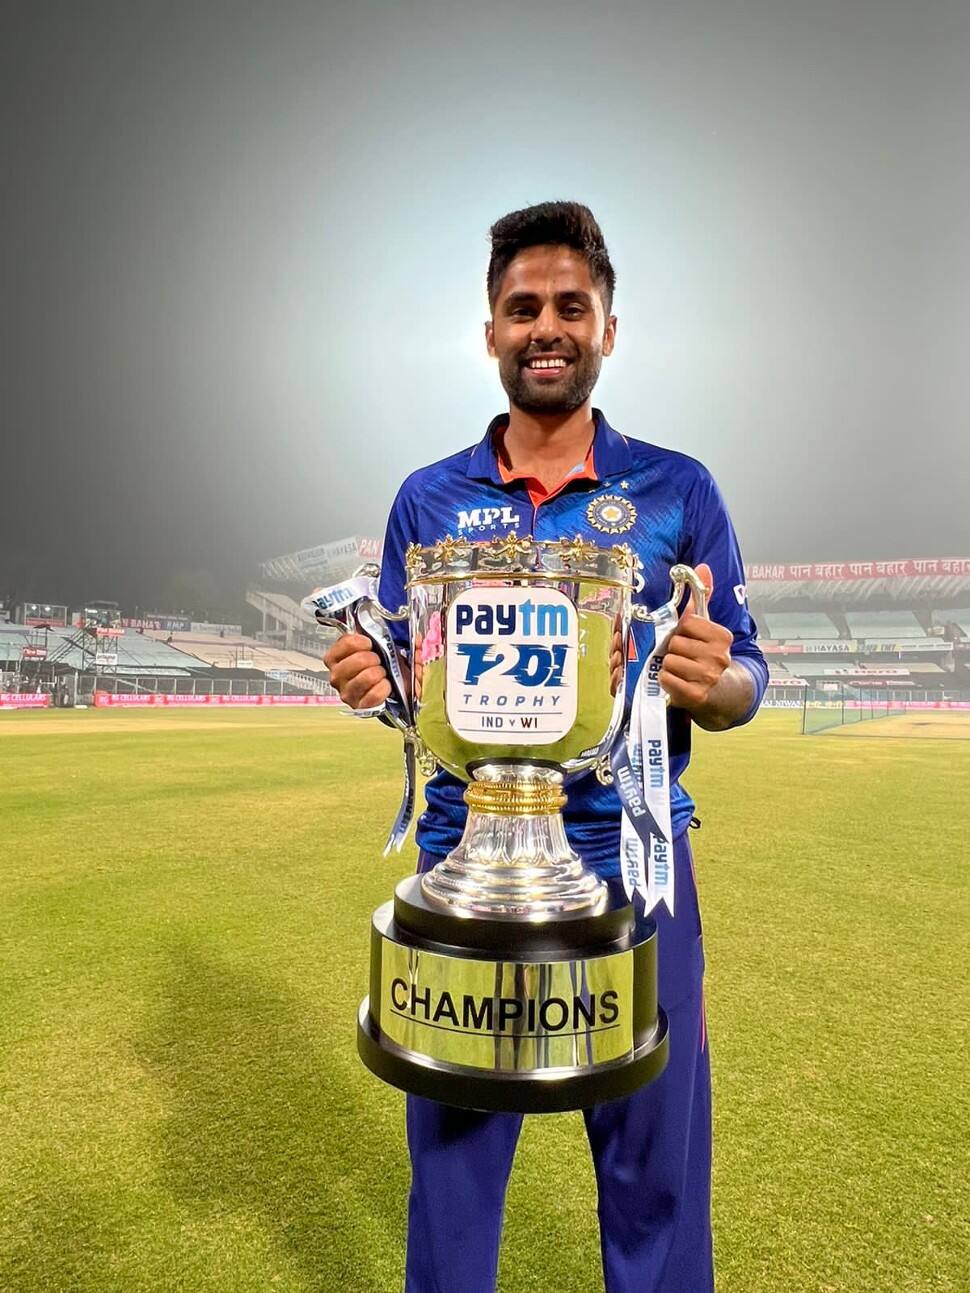 Mumbai Indians batter Suryakumar Yadav dislocated his finger in the limited-overs series against West Indies. Yadav was ruled out of the Sri Lanka series and is set to miss MI's first game of IPL 2022 against Delhi Capitals. (Source: Twitter)